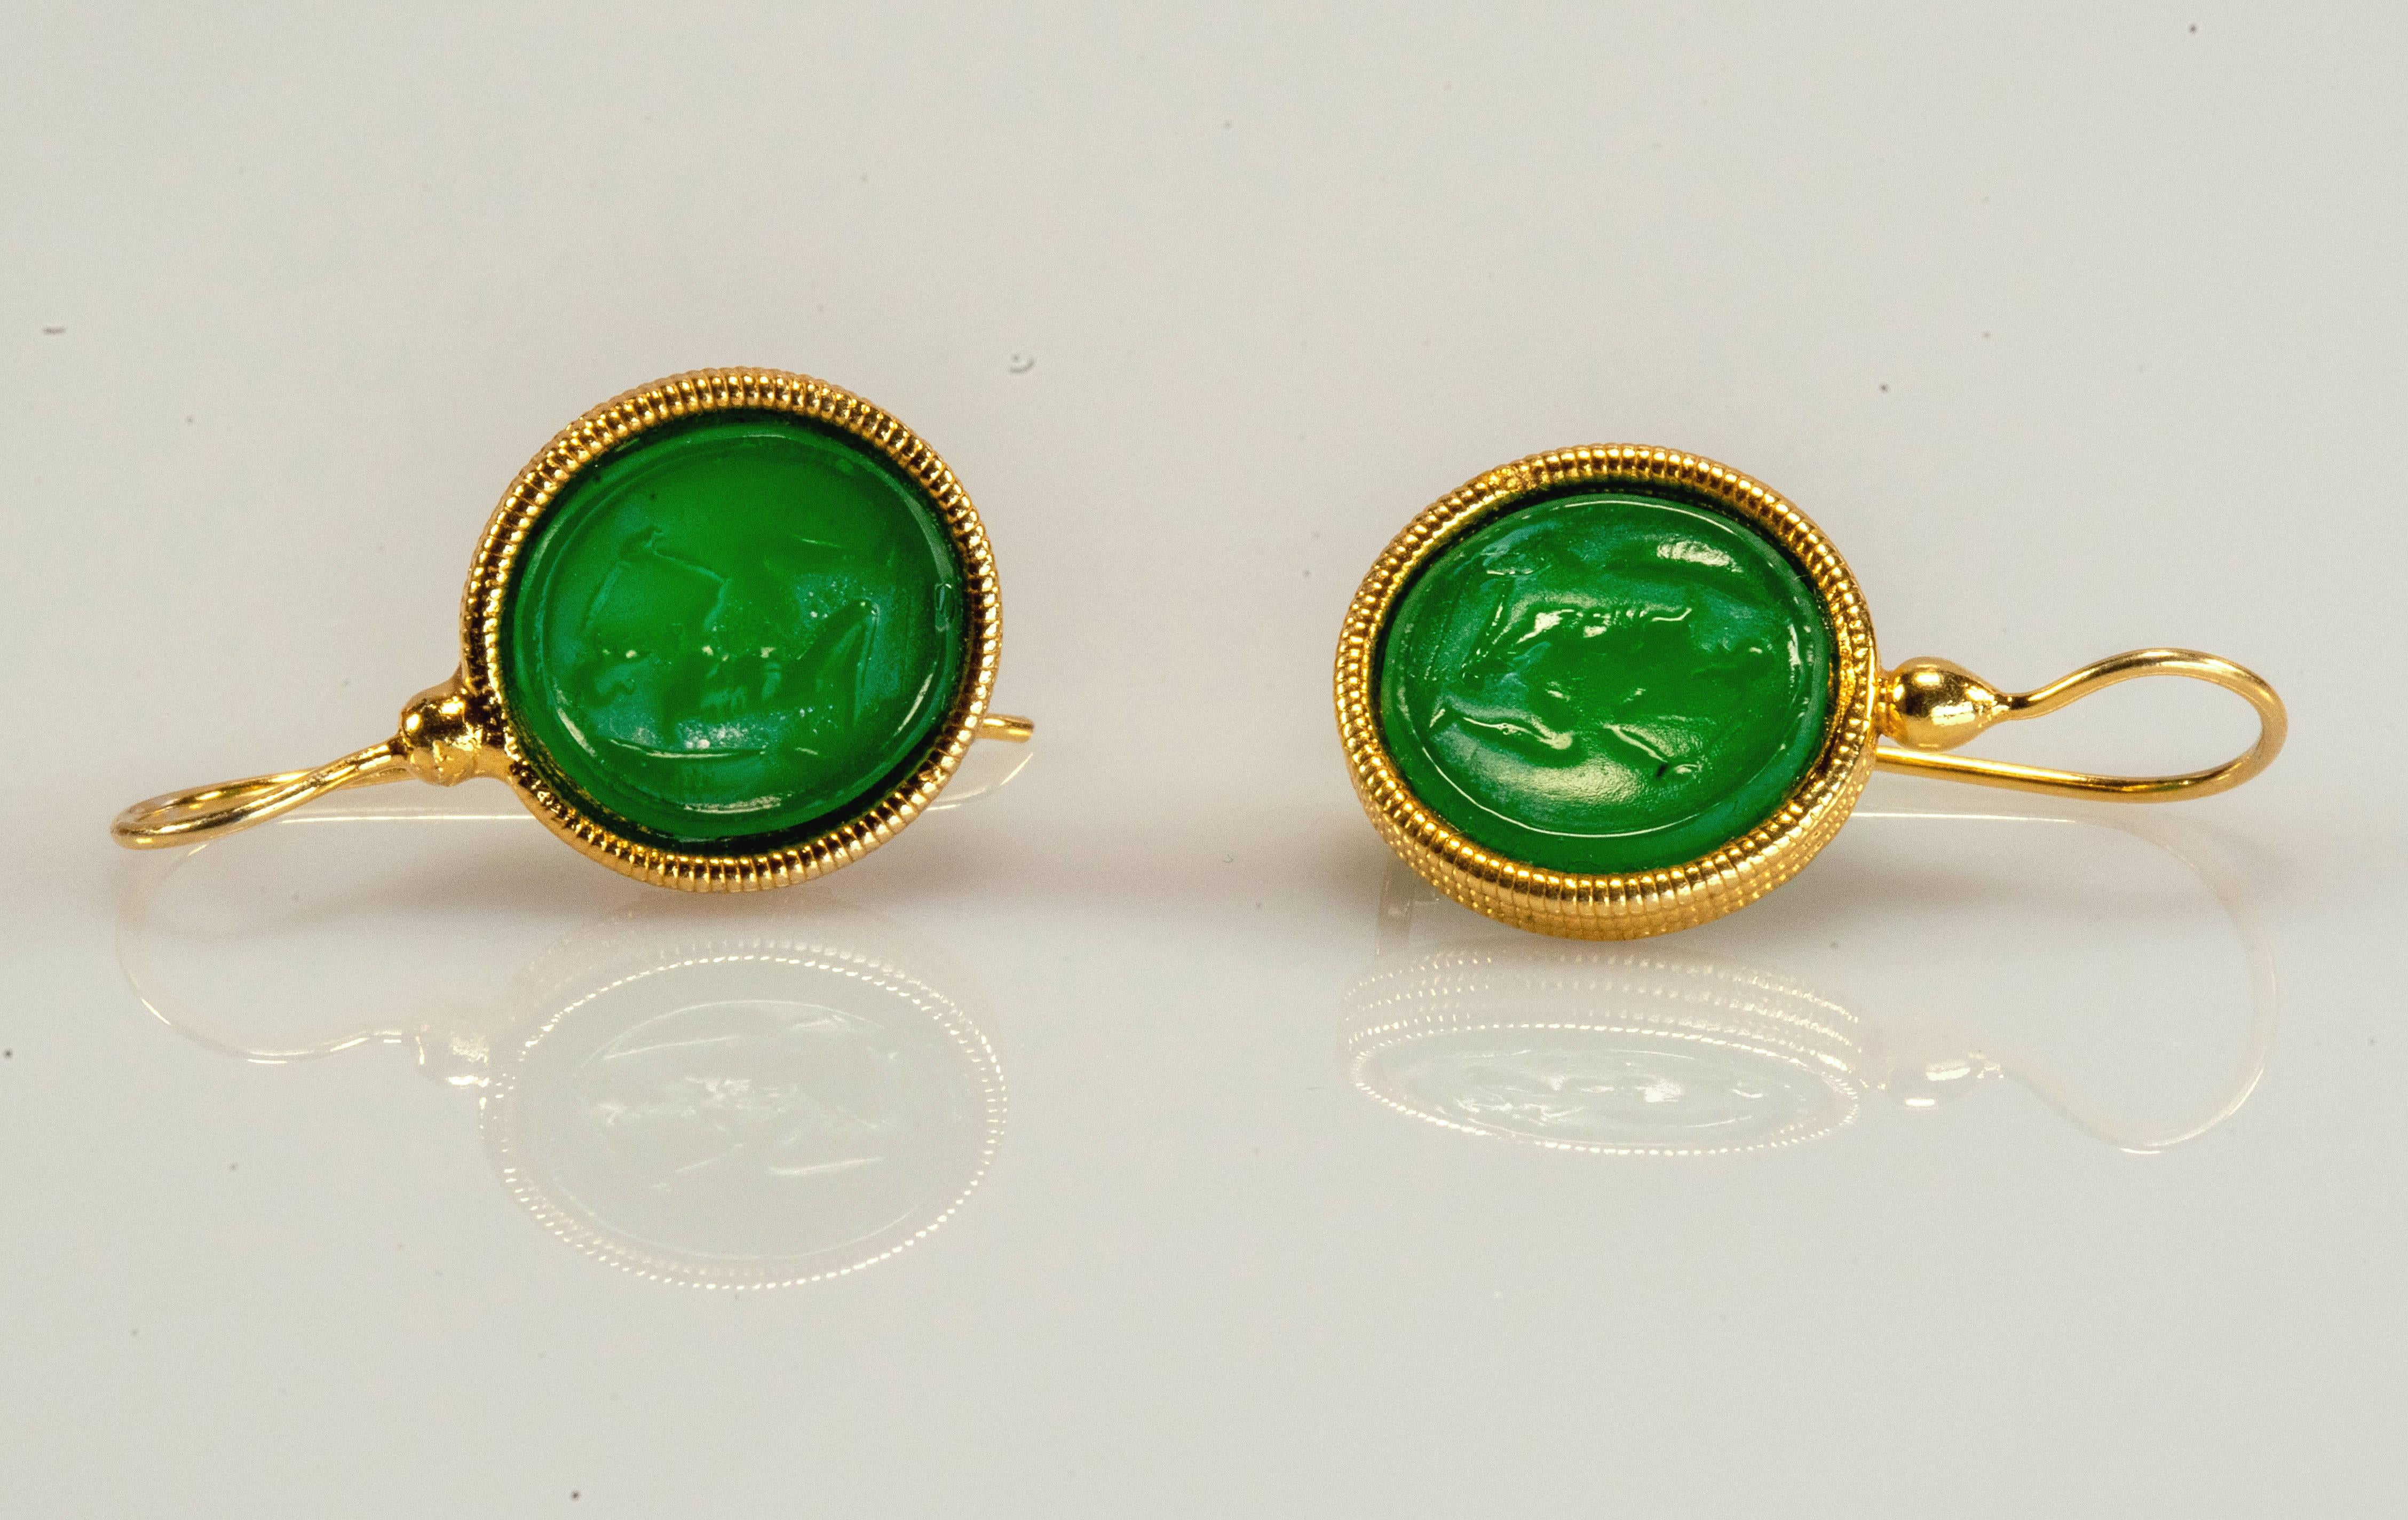 Pretty earrings in gilded 925 silver with round cameos made of green glass paste.
The decorative technique with which Etruscans and ancient Romans made glass paste jewels, on which they depicted scenes of everyday life or mythology, has been